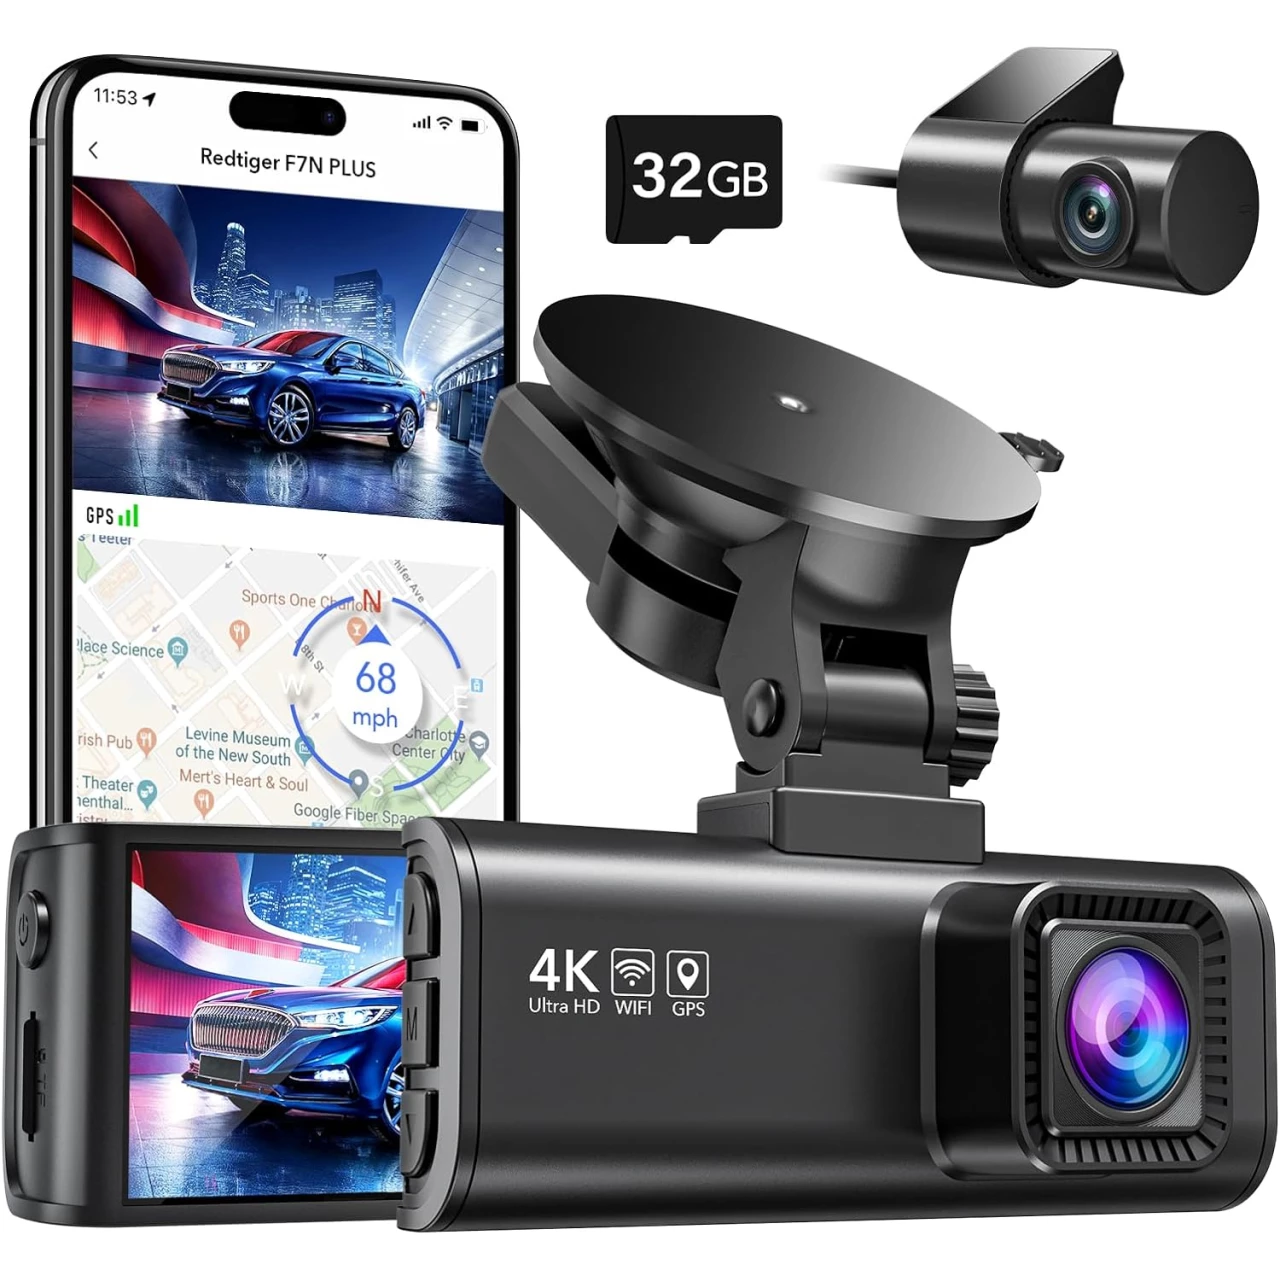 REDTIGER Dash cam Front Rear Dash Camera 4K/2.5K Full HD Car Dashboard Recorder with 3.16” IPS Screen, Wi-Fi GPS Night Vision Loop Recording 170° Wide Angle WDR, Free 32GB Card